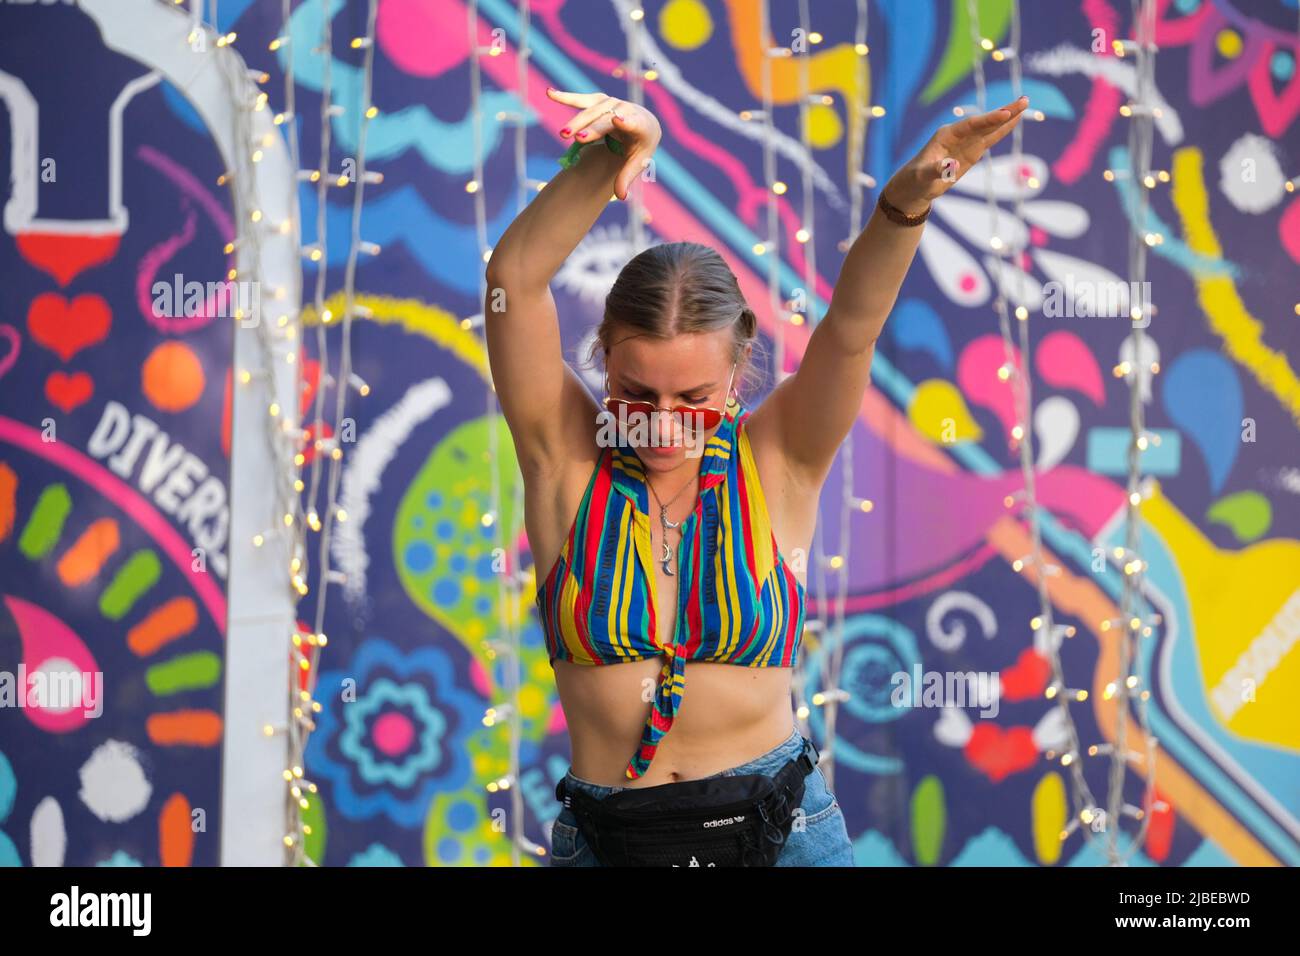 Ta' Qali, Malta. 5th June, 2022. A woman dances during the Earth Garden festival at the National Park in Ta' Qali, Malta, on June 5, 2022. The three-day festival aimed at increasing public awareness of environmental protection concluded here on Sunday. Credit: Jonathan Borg/Xinhua/Alamy Live News Stock Photo